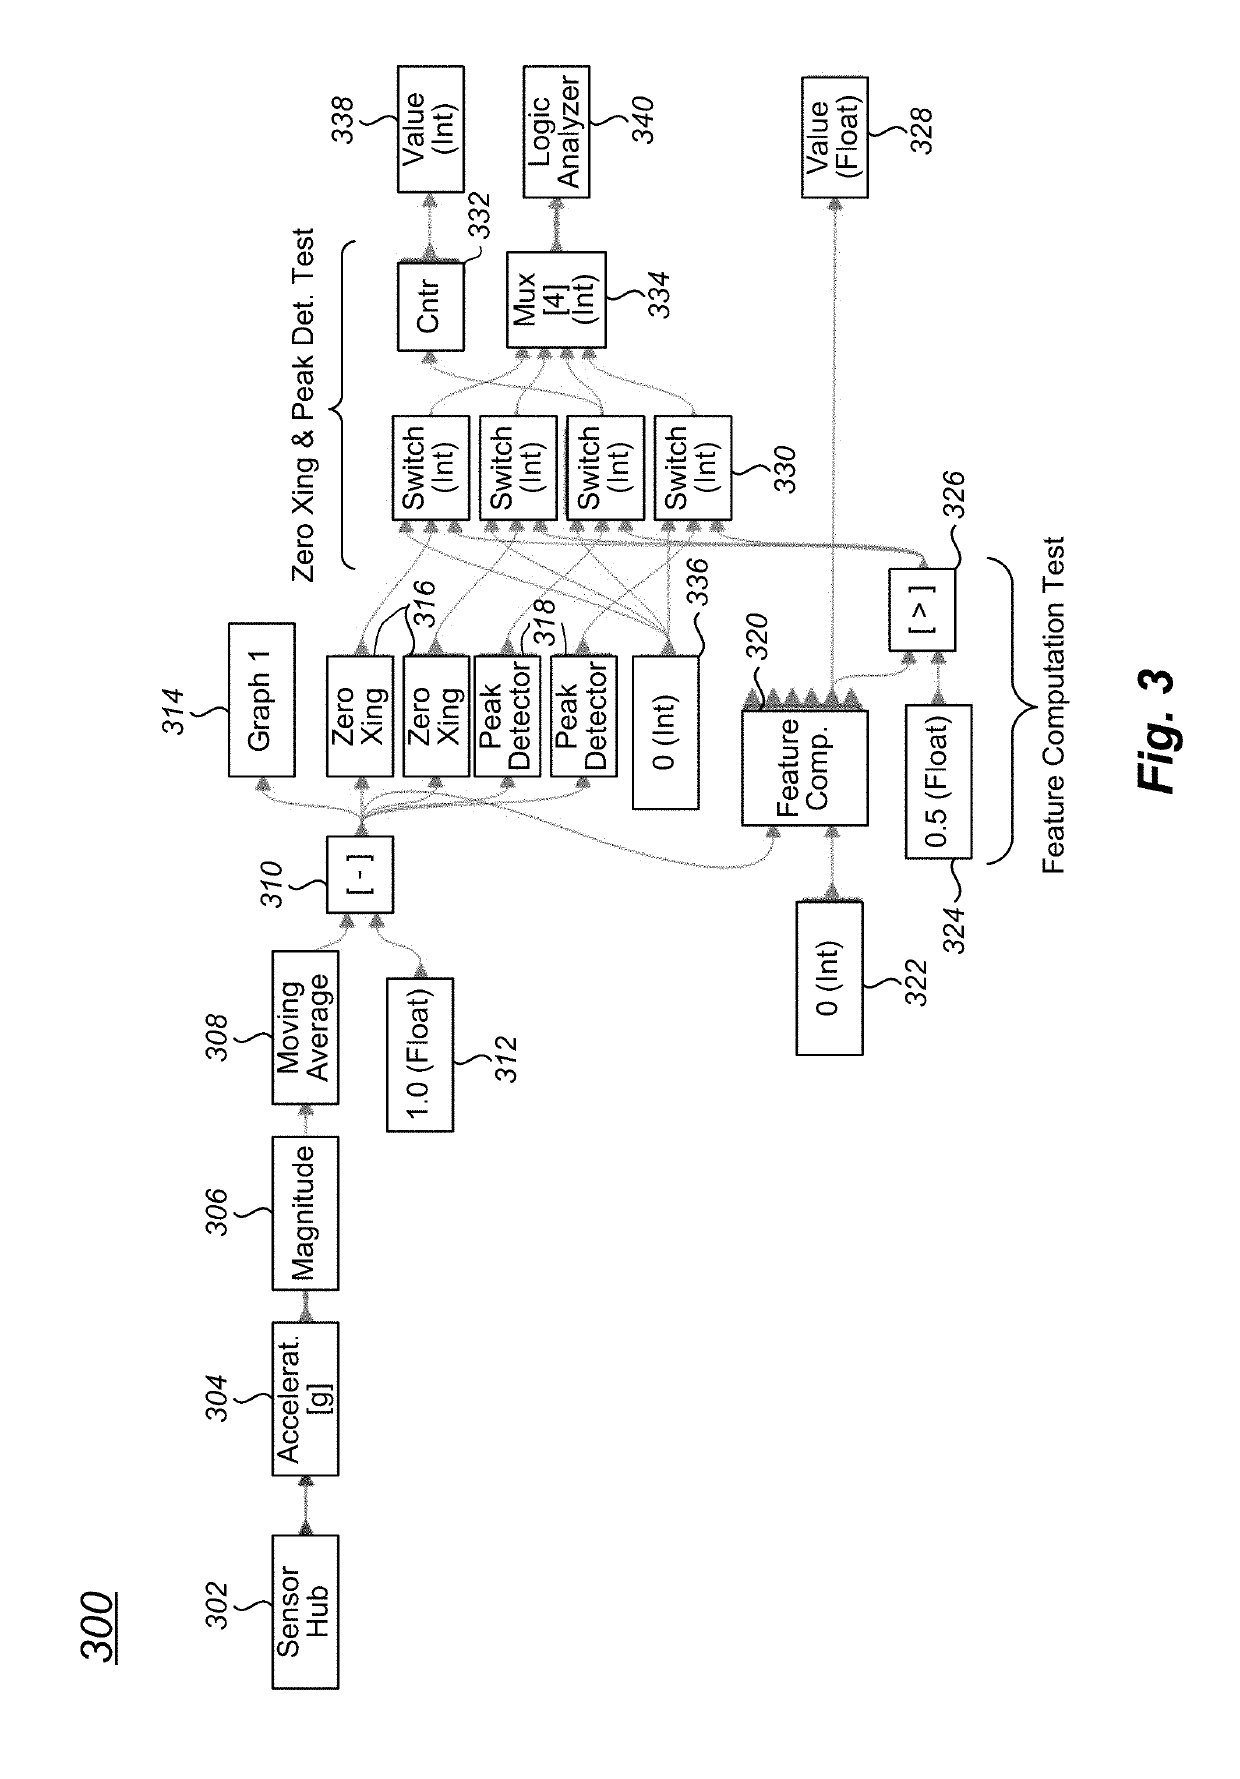 Method and apparatus for quick prototyping of embedded peripherals